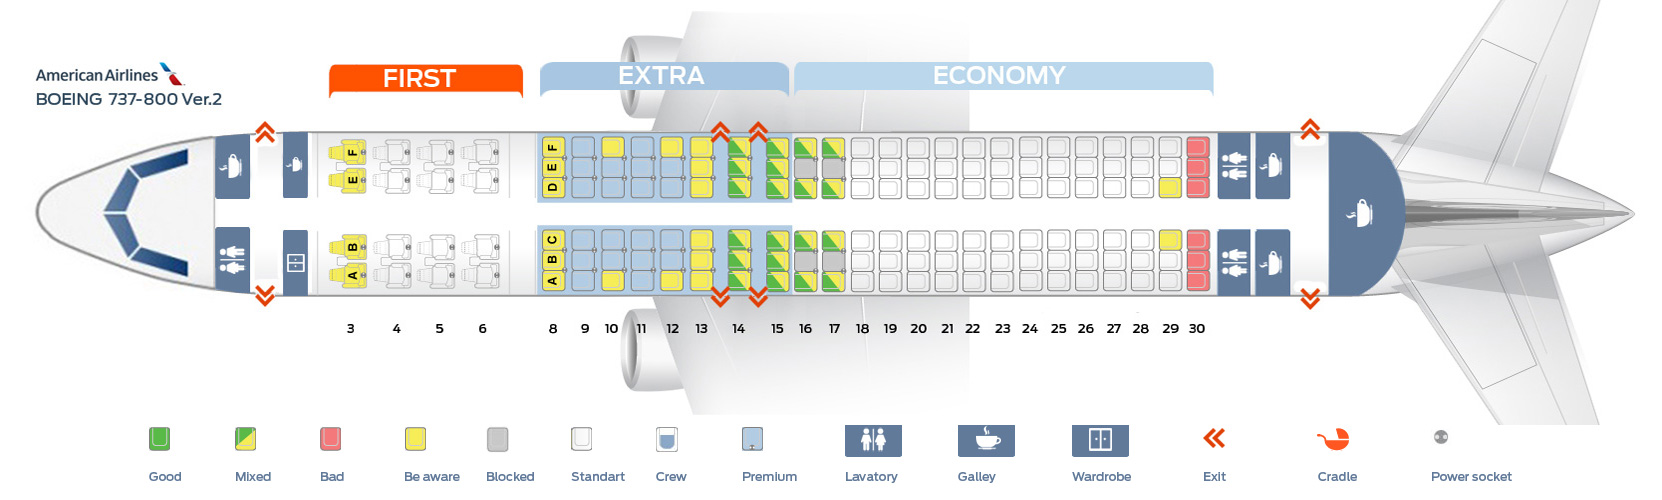 Seat Map Boeing 737 800 American Airlines Best Seats In The Plane